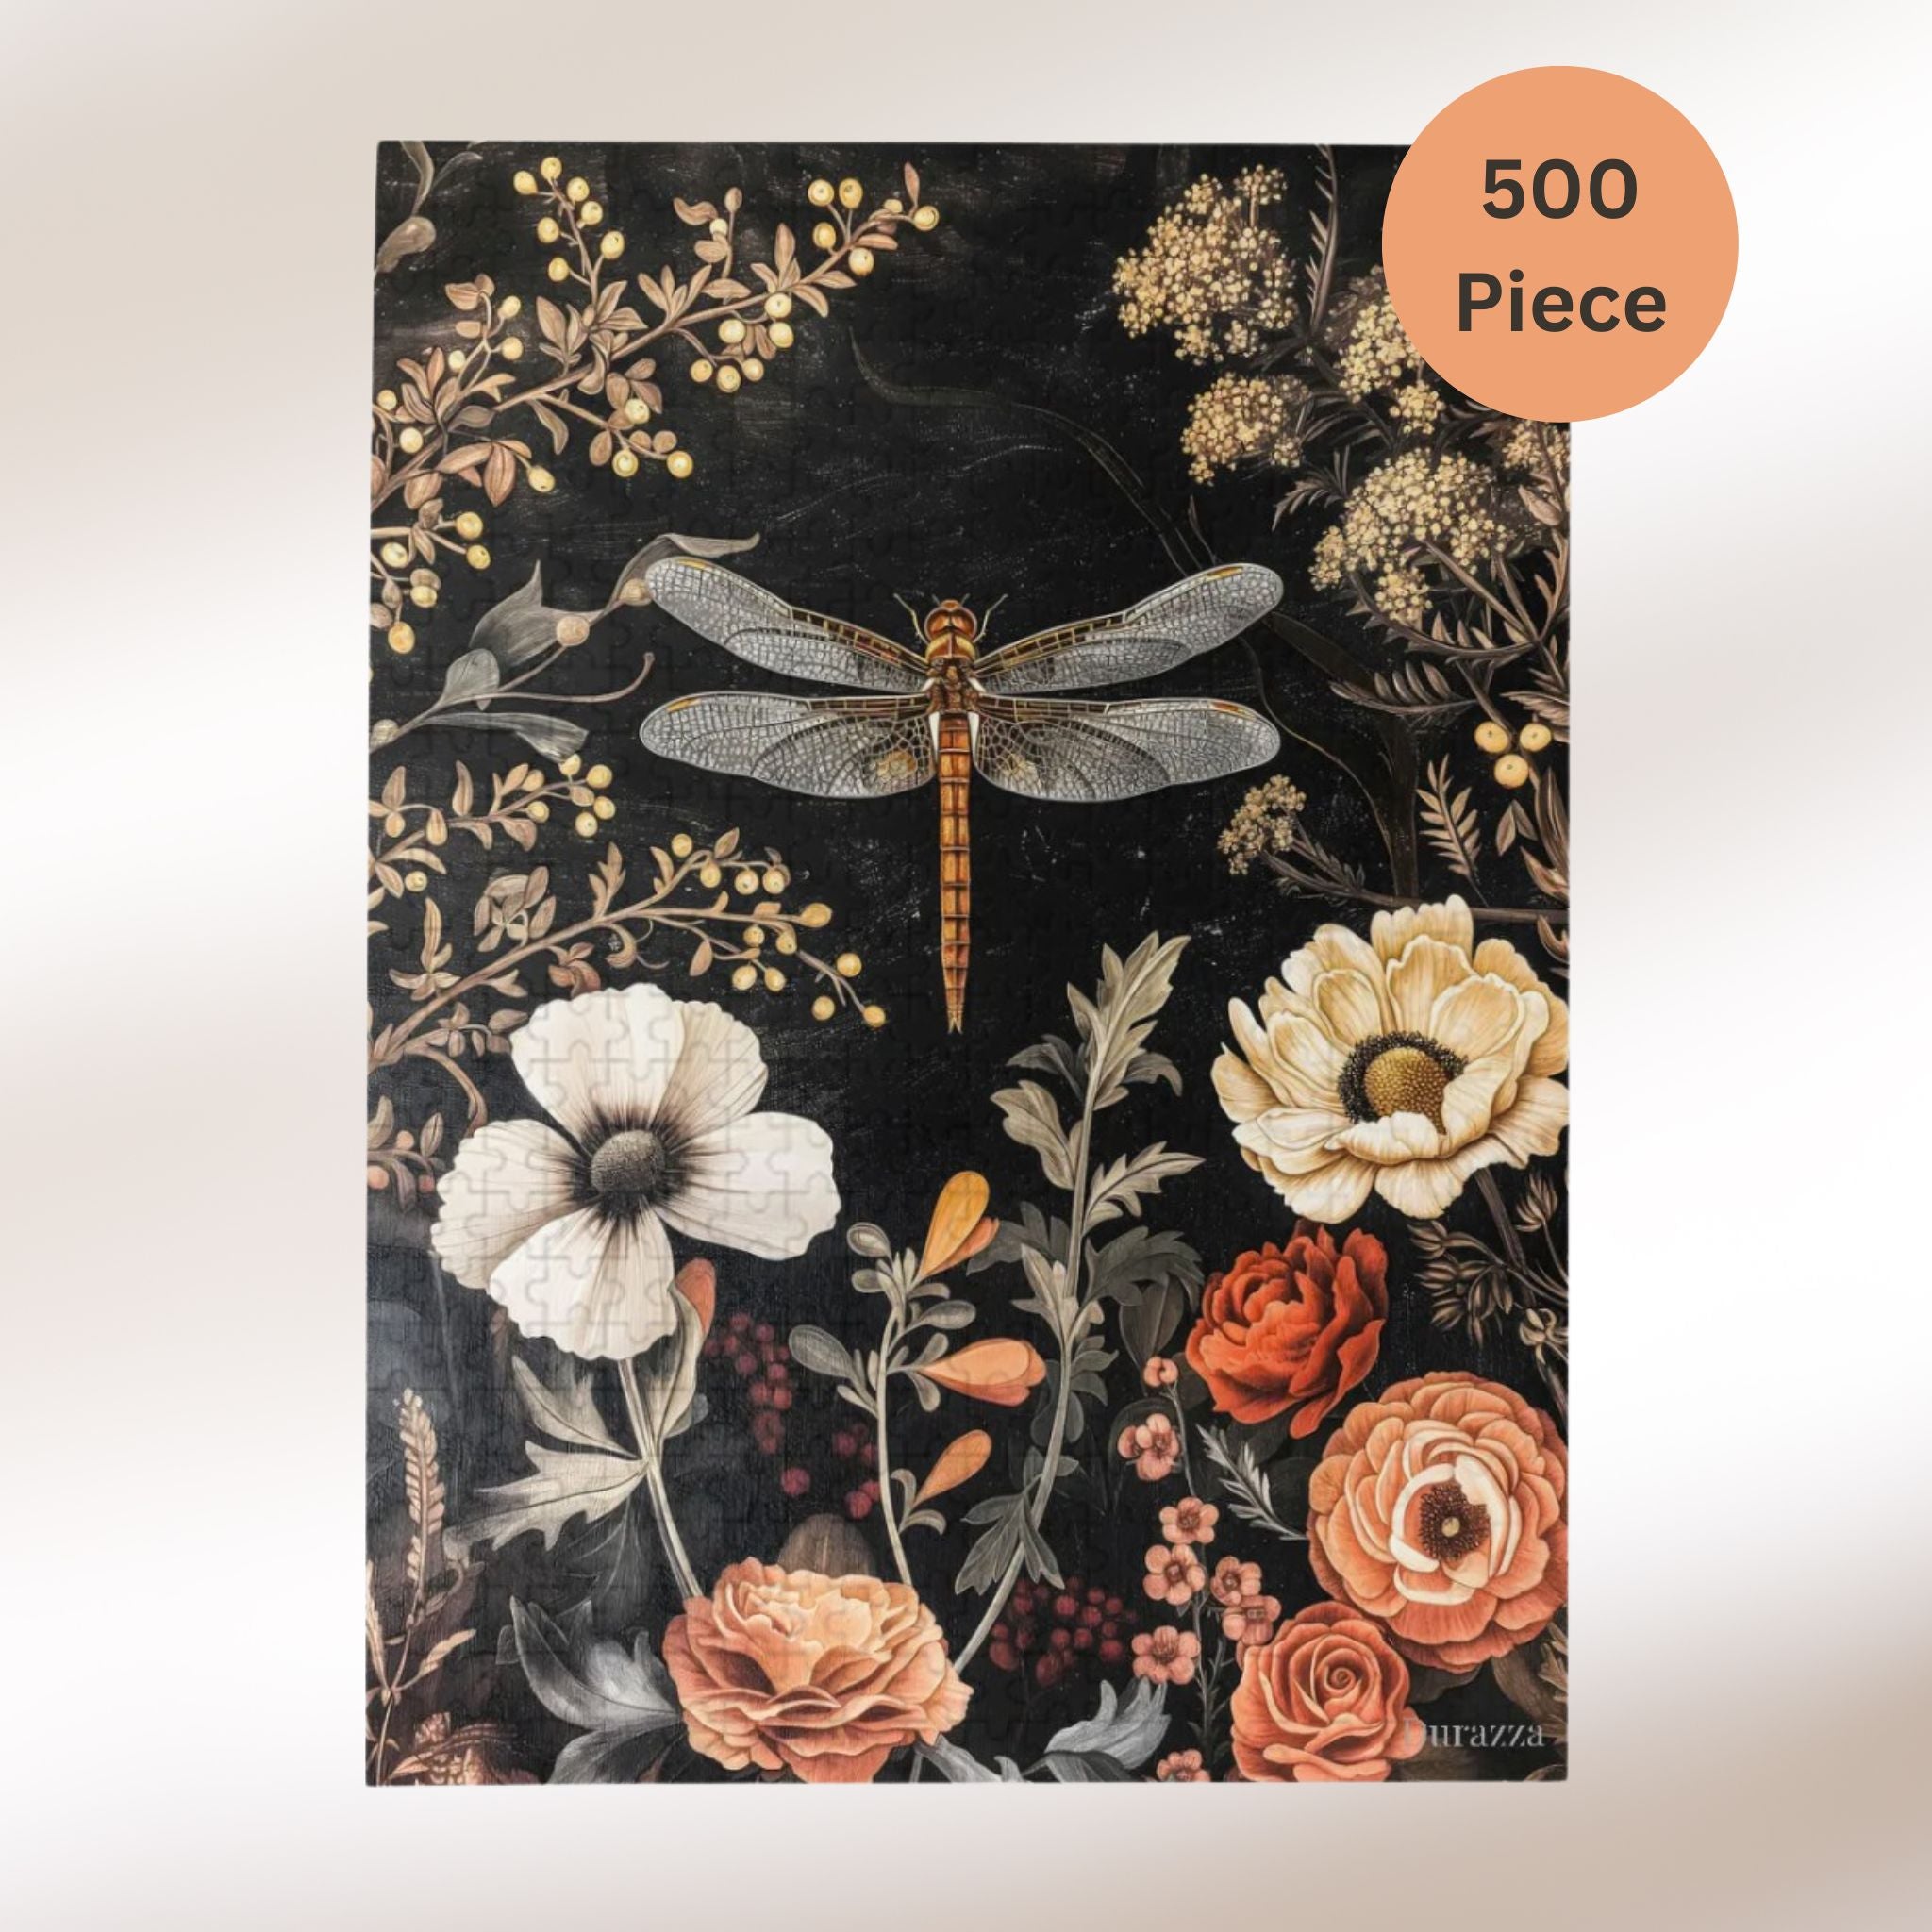 Twilight Dragonfly Wooden Jigsaw Puzzle 500 or 1000 piece